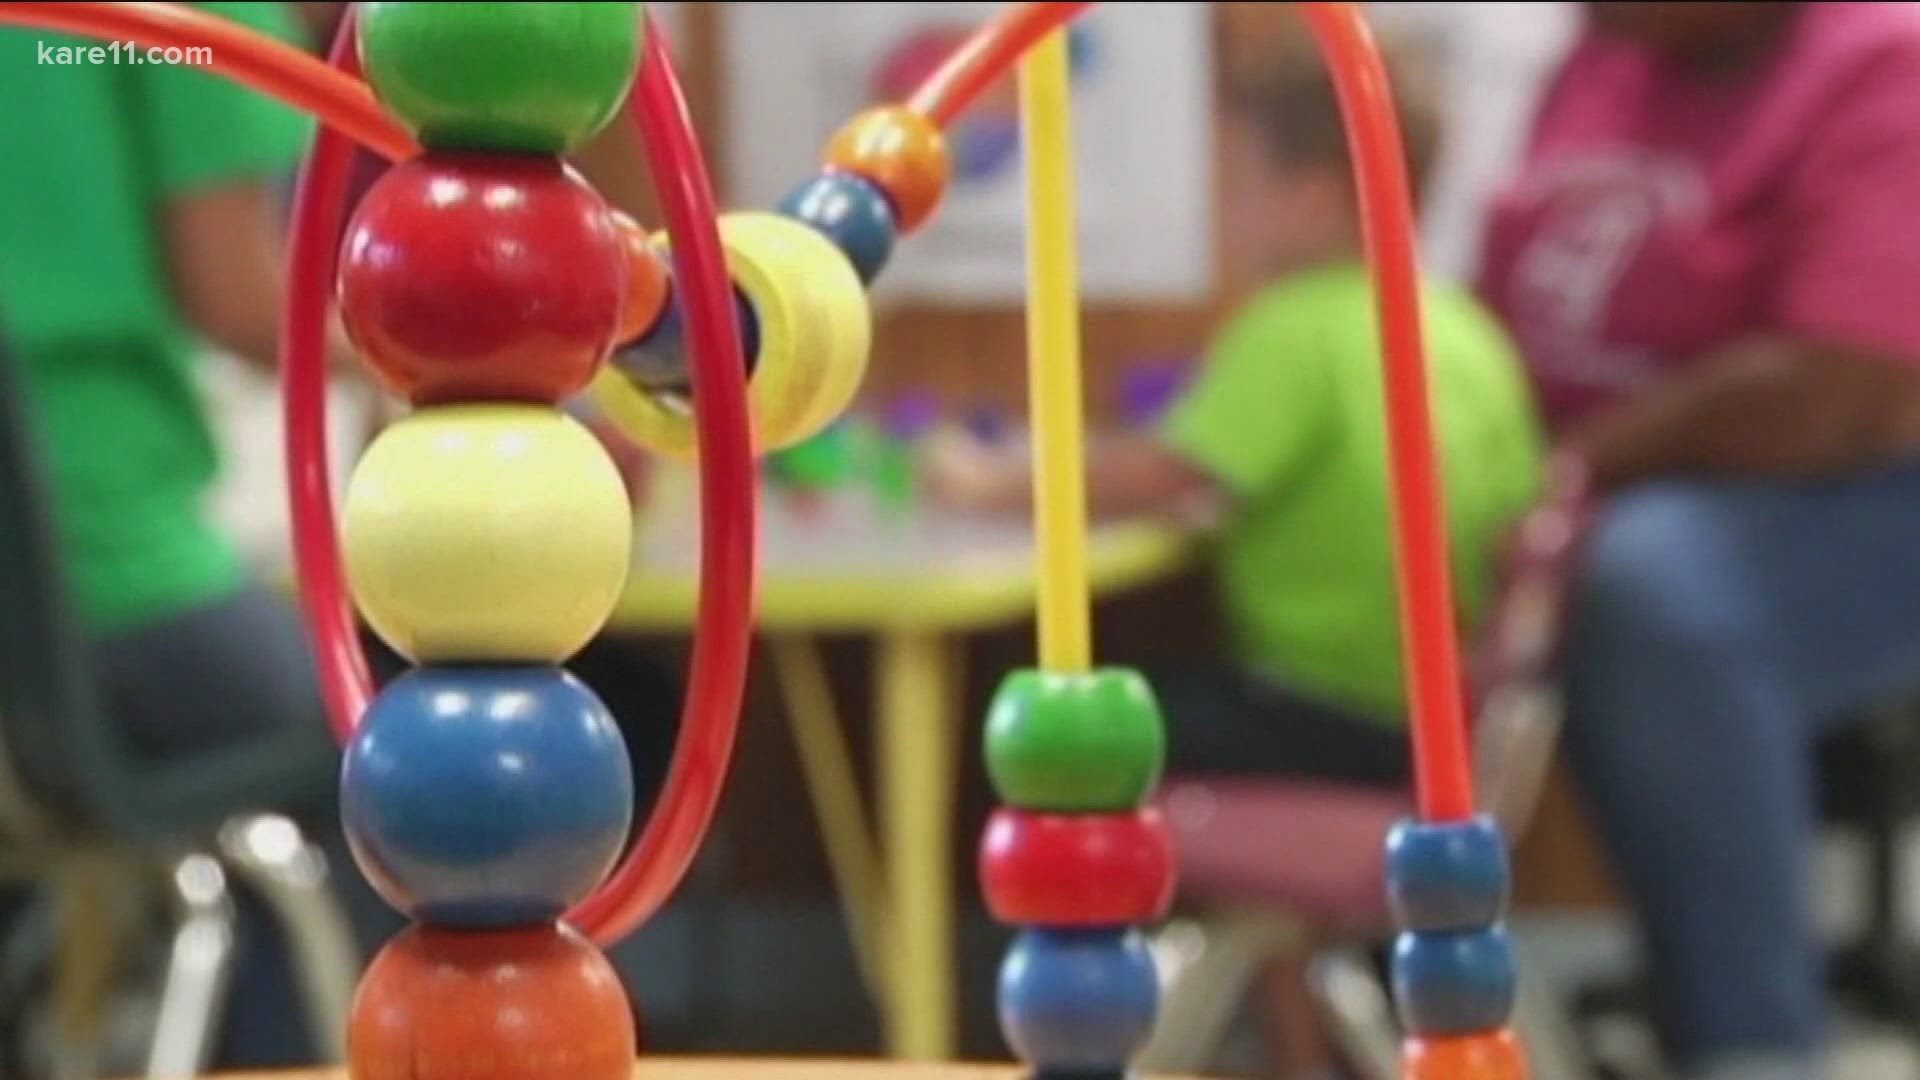 The state told providers they're no longer required to hold kids and staff out of child care following an exposure.